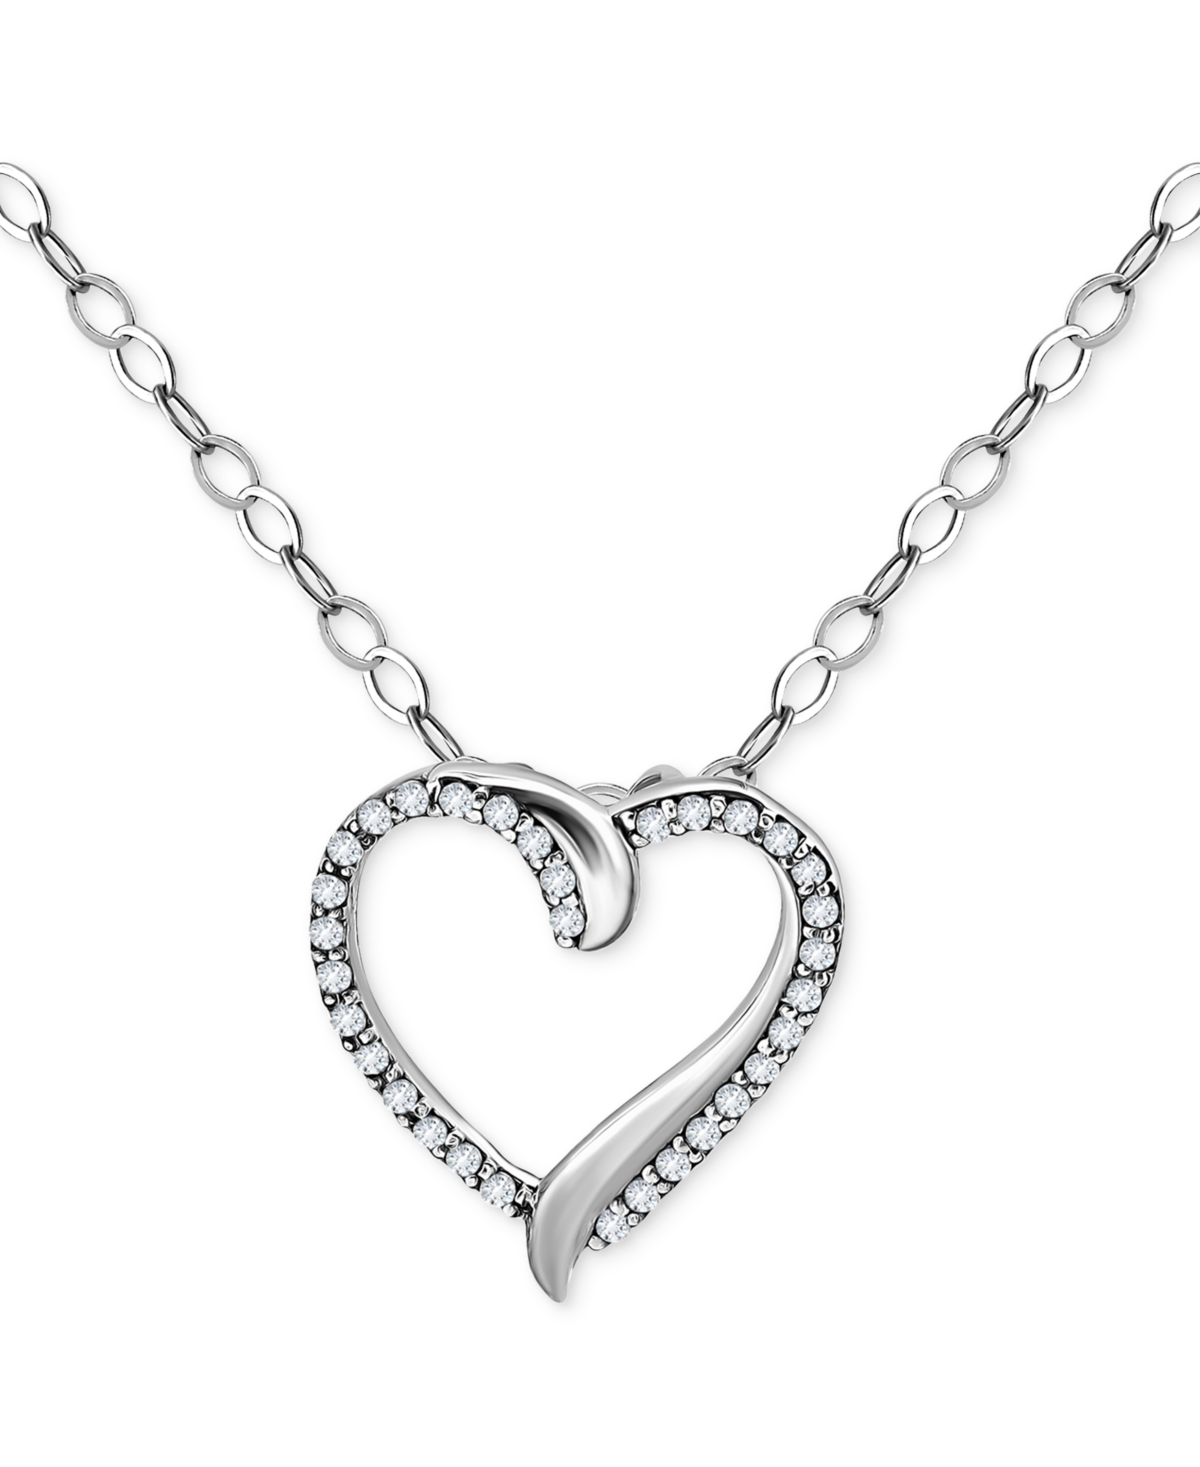 Giani Bernini Cubic Zirconia Open Heart Pendant Necklace In Sterling Silver, 16" + 2" Extender, Created For Macy's In Gold Over Silver